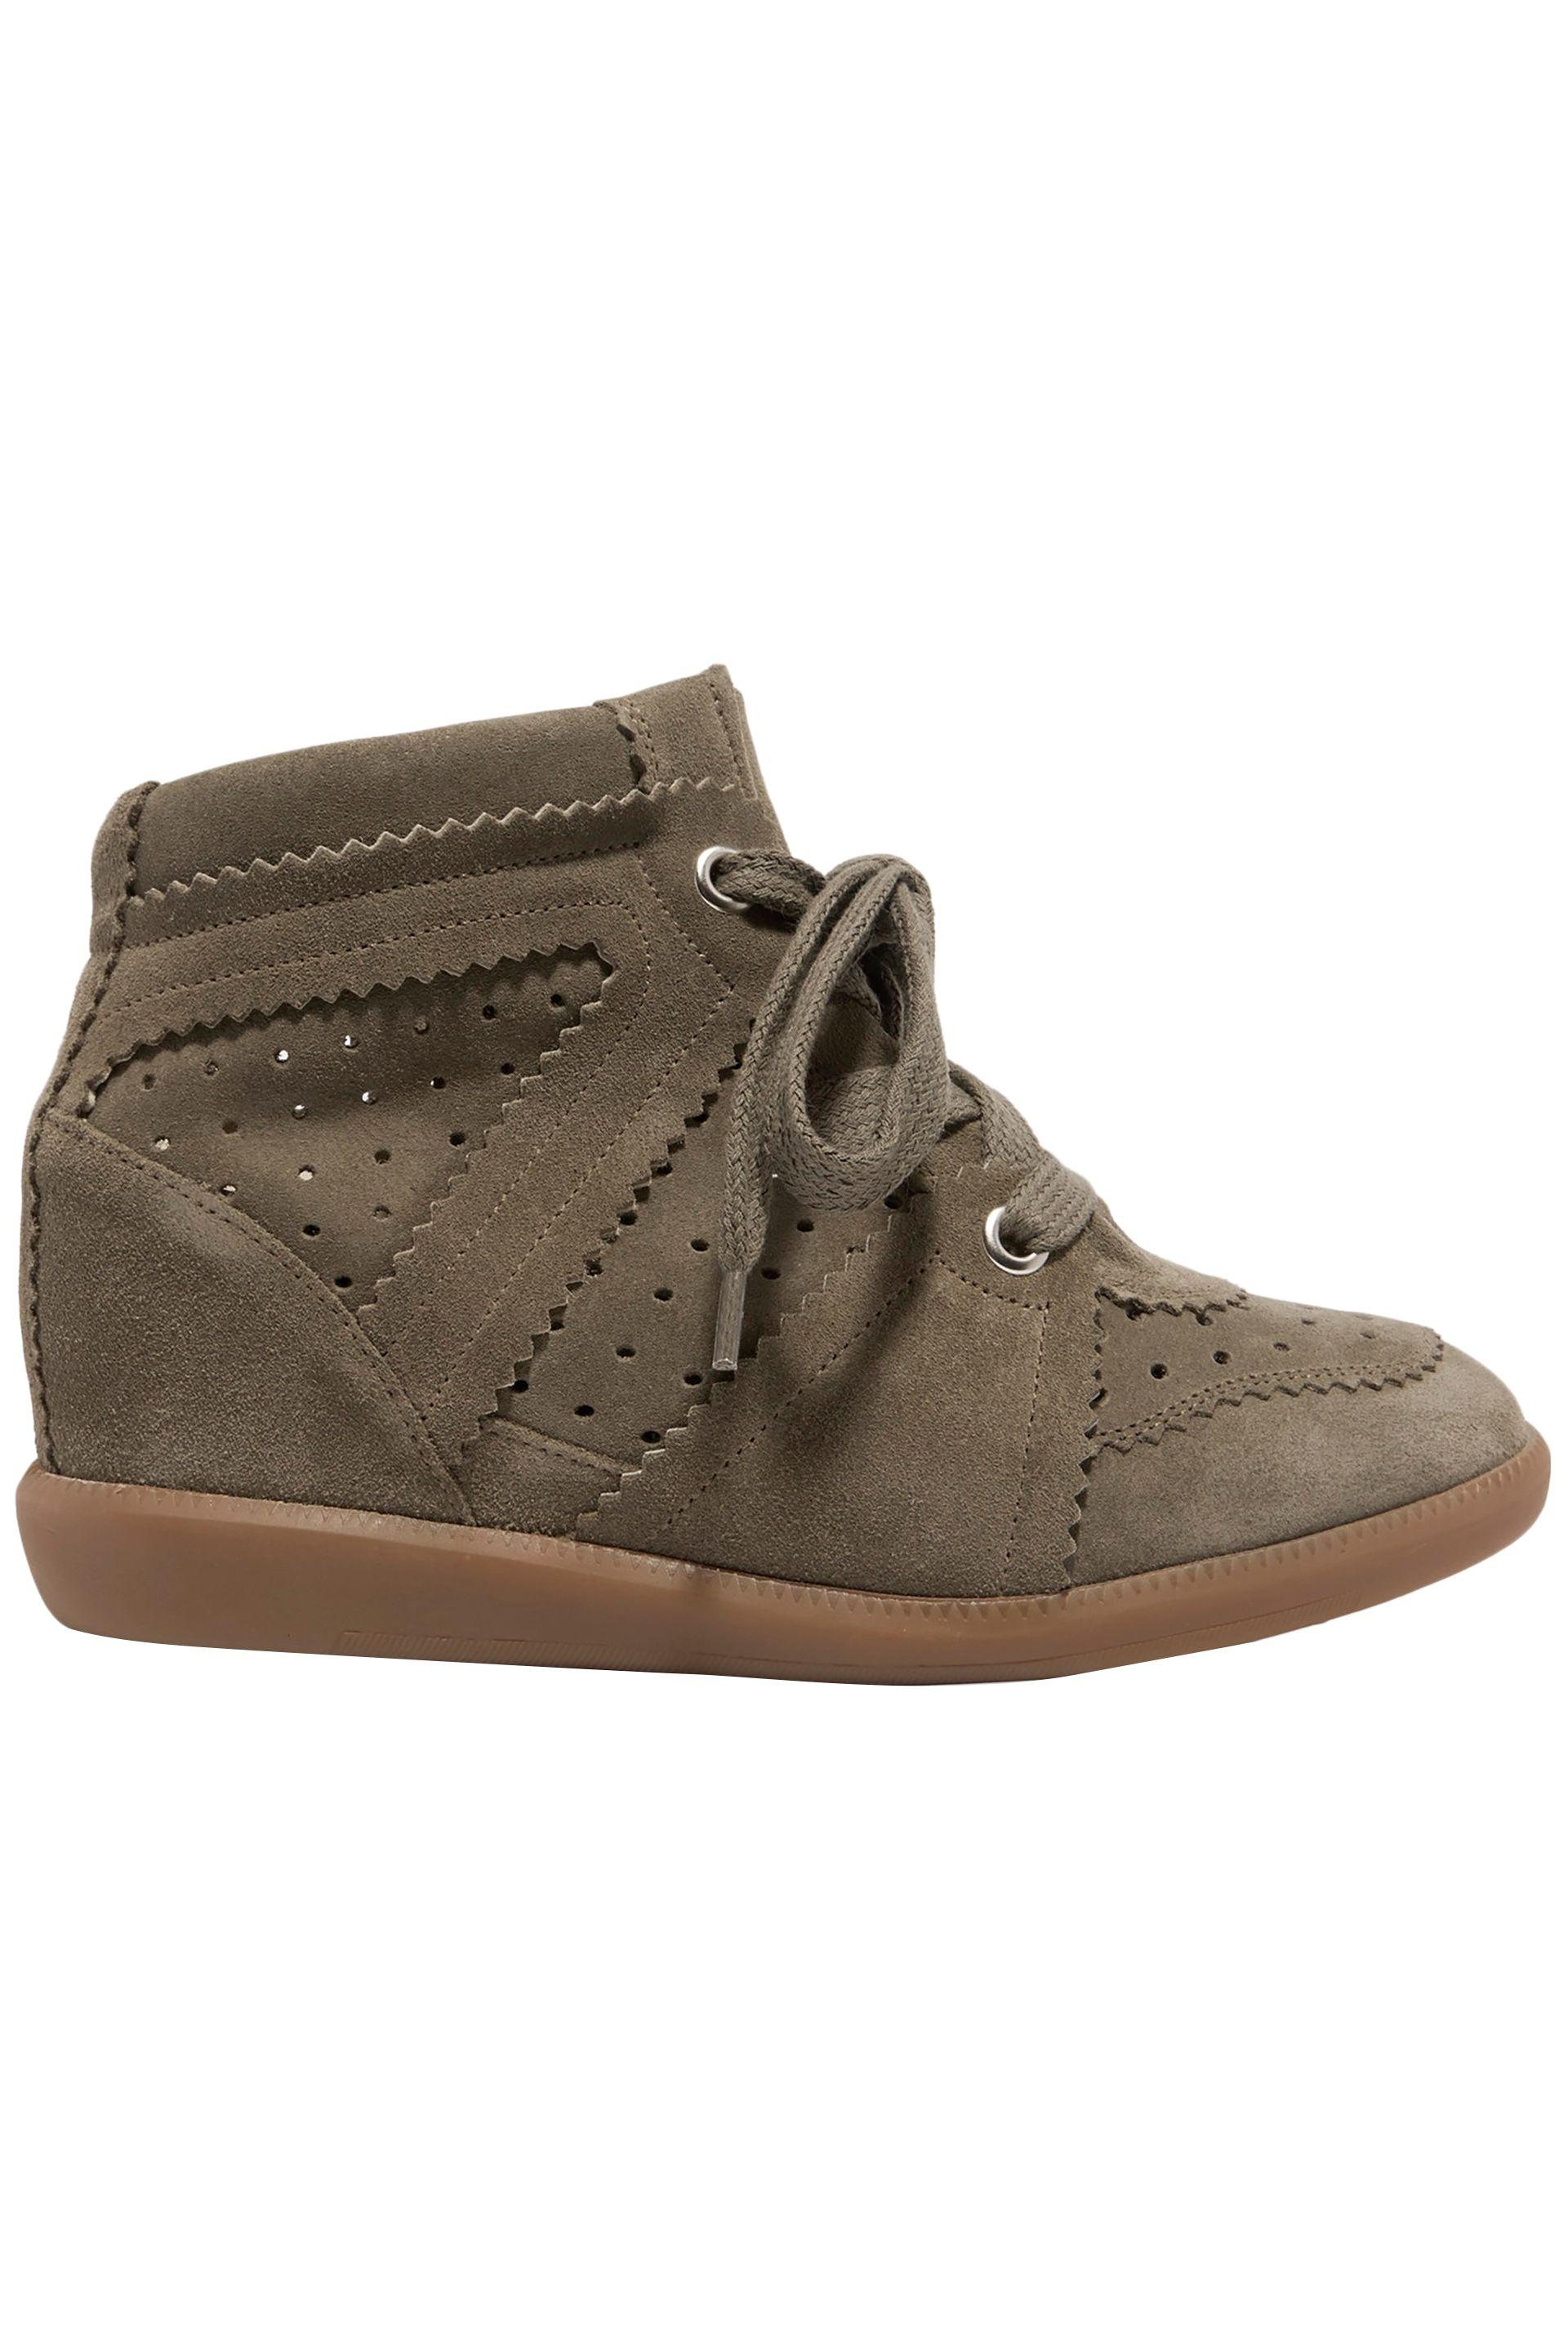 Isabel Marant Étoile Bobby Perforated Suede Wedge Sneakers Army Green - Lyst